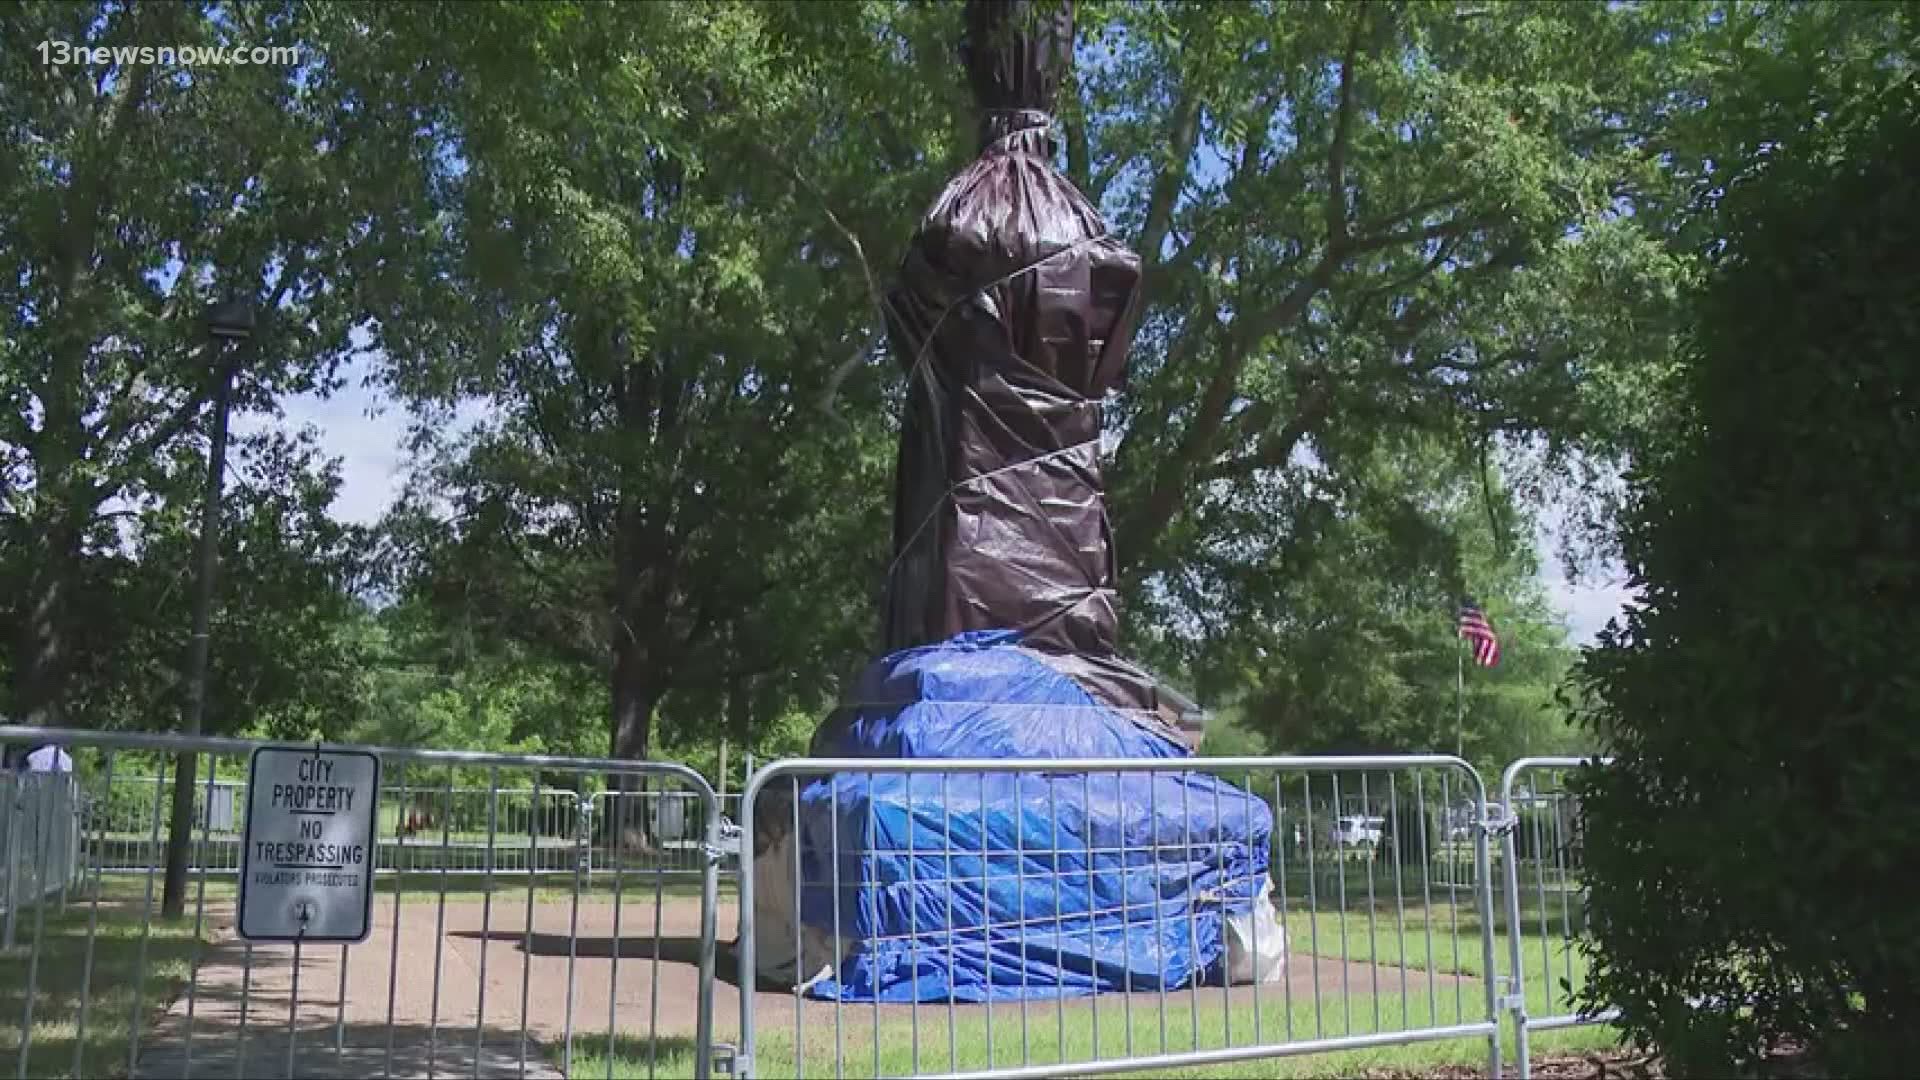 Two groups have put in bids to take possession of the statue. Now the city will have to decide which proposal to go with.